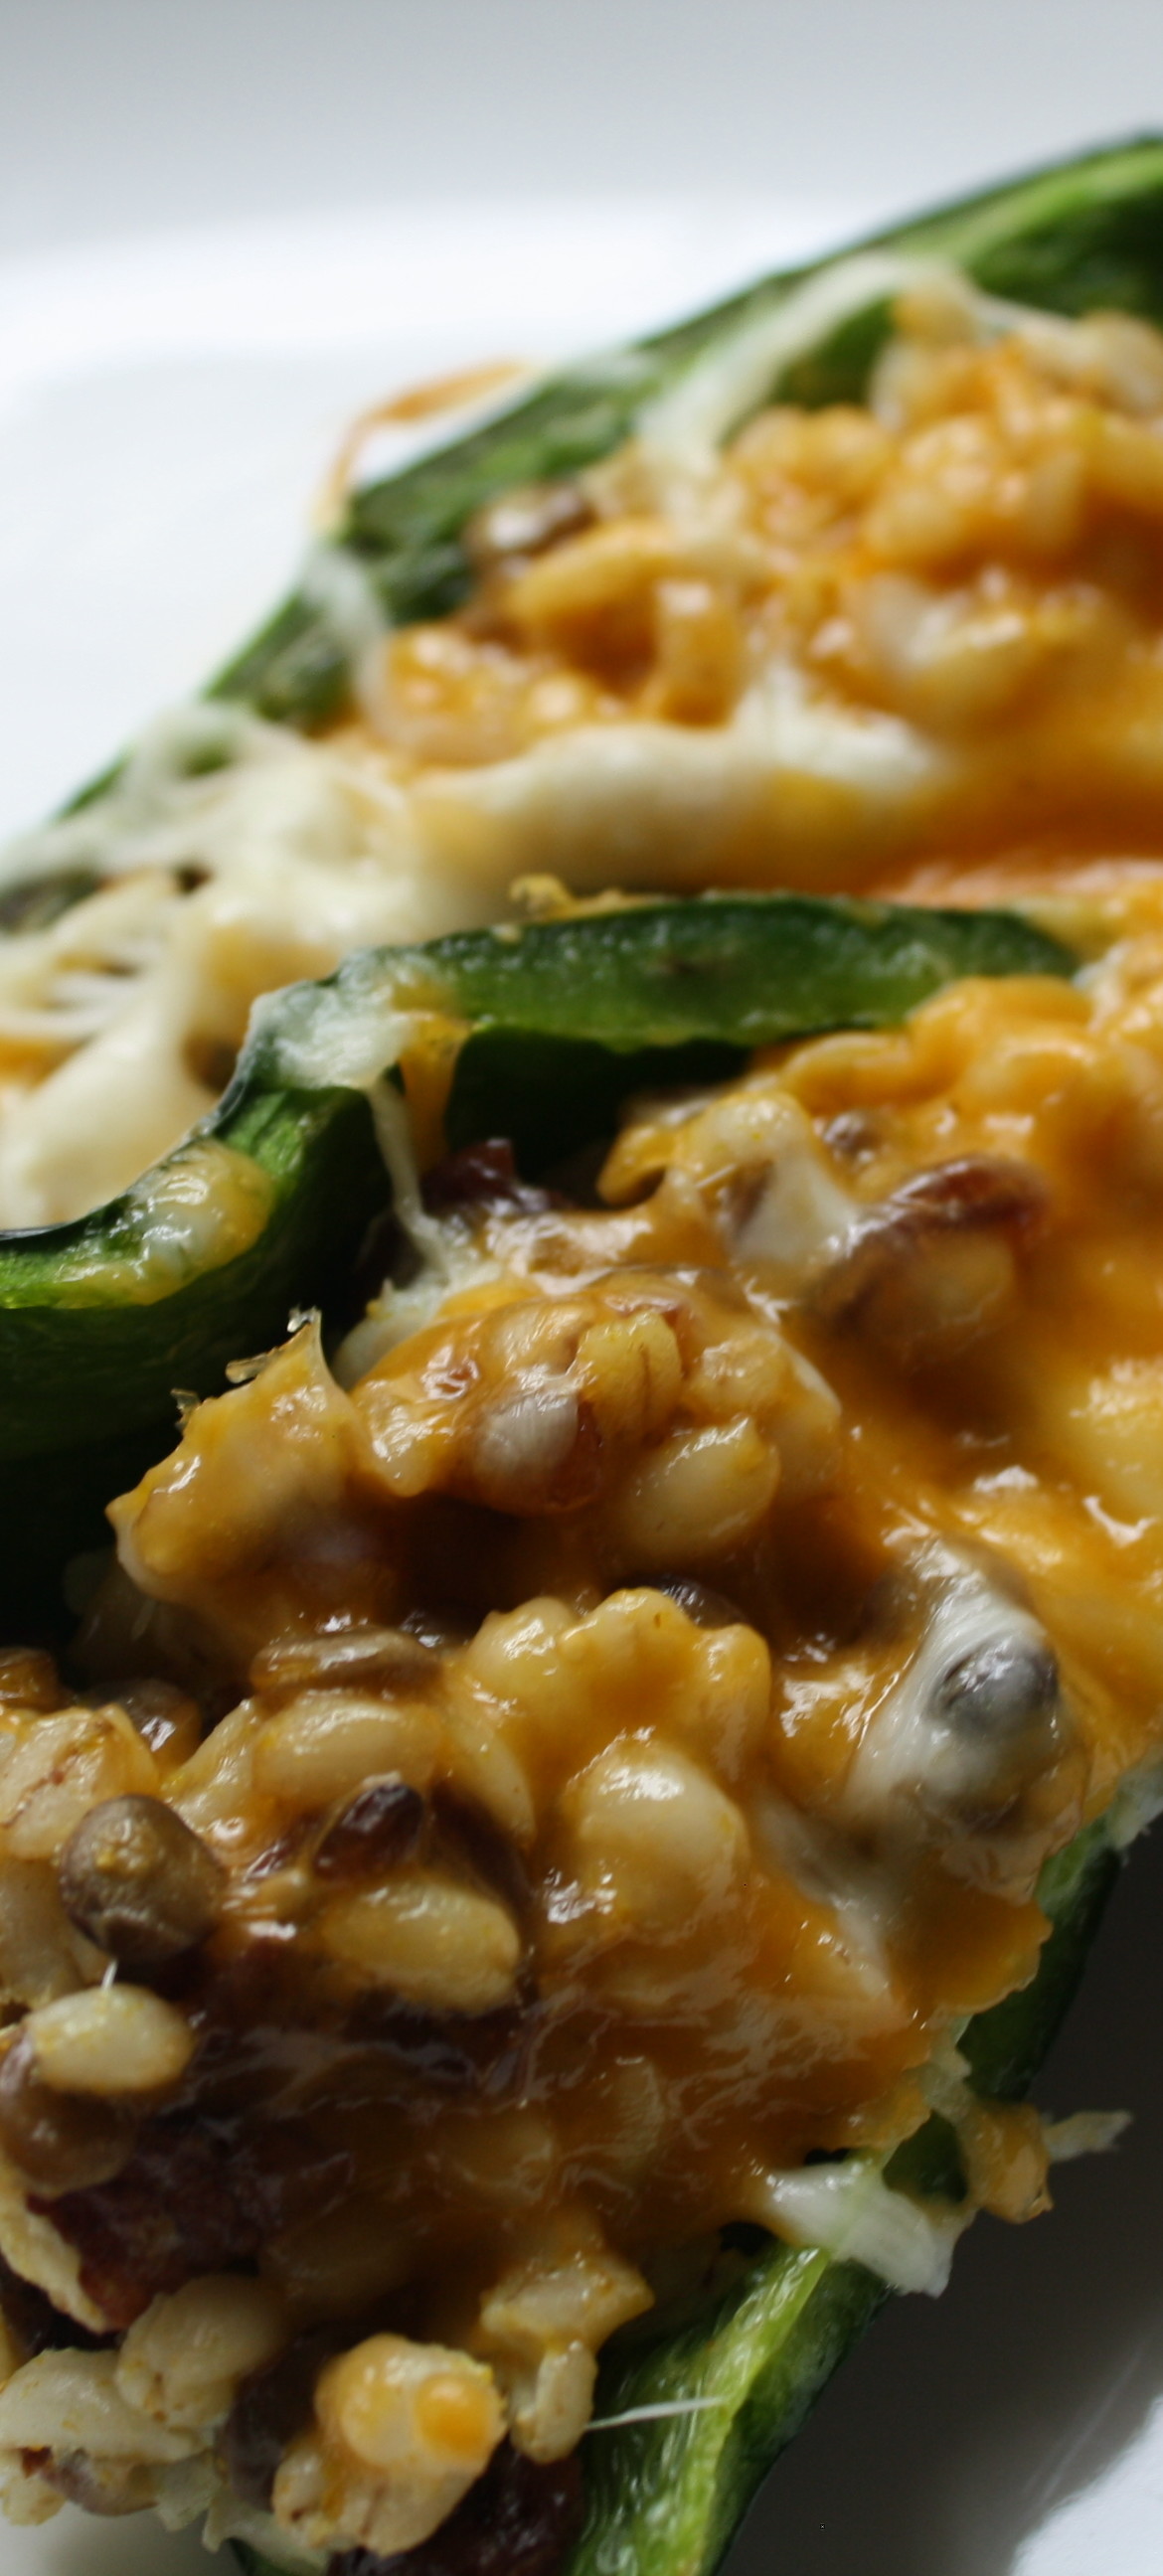 VEGETARIAN RECIPES- Open-Faced Stuffed Poblano Peppers